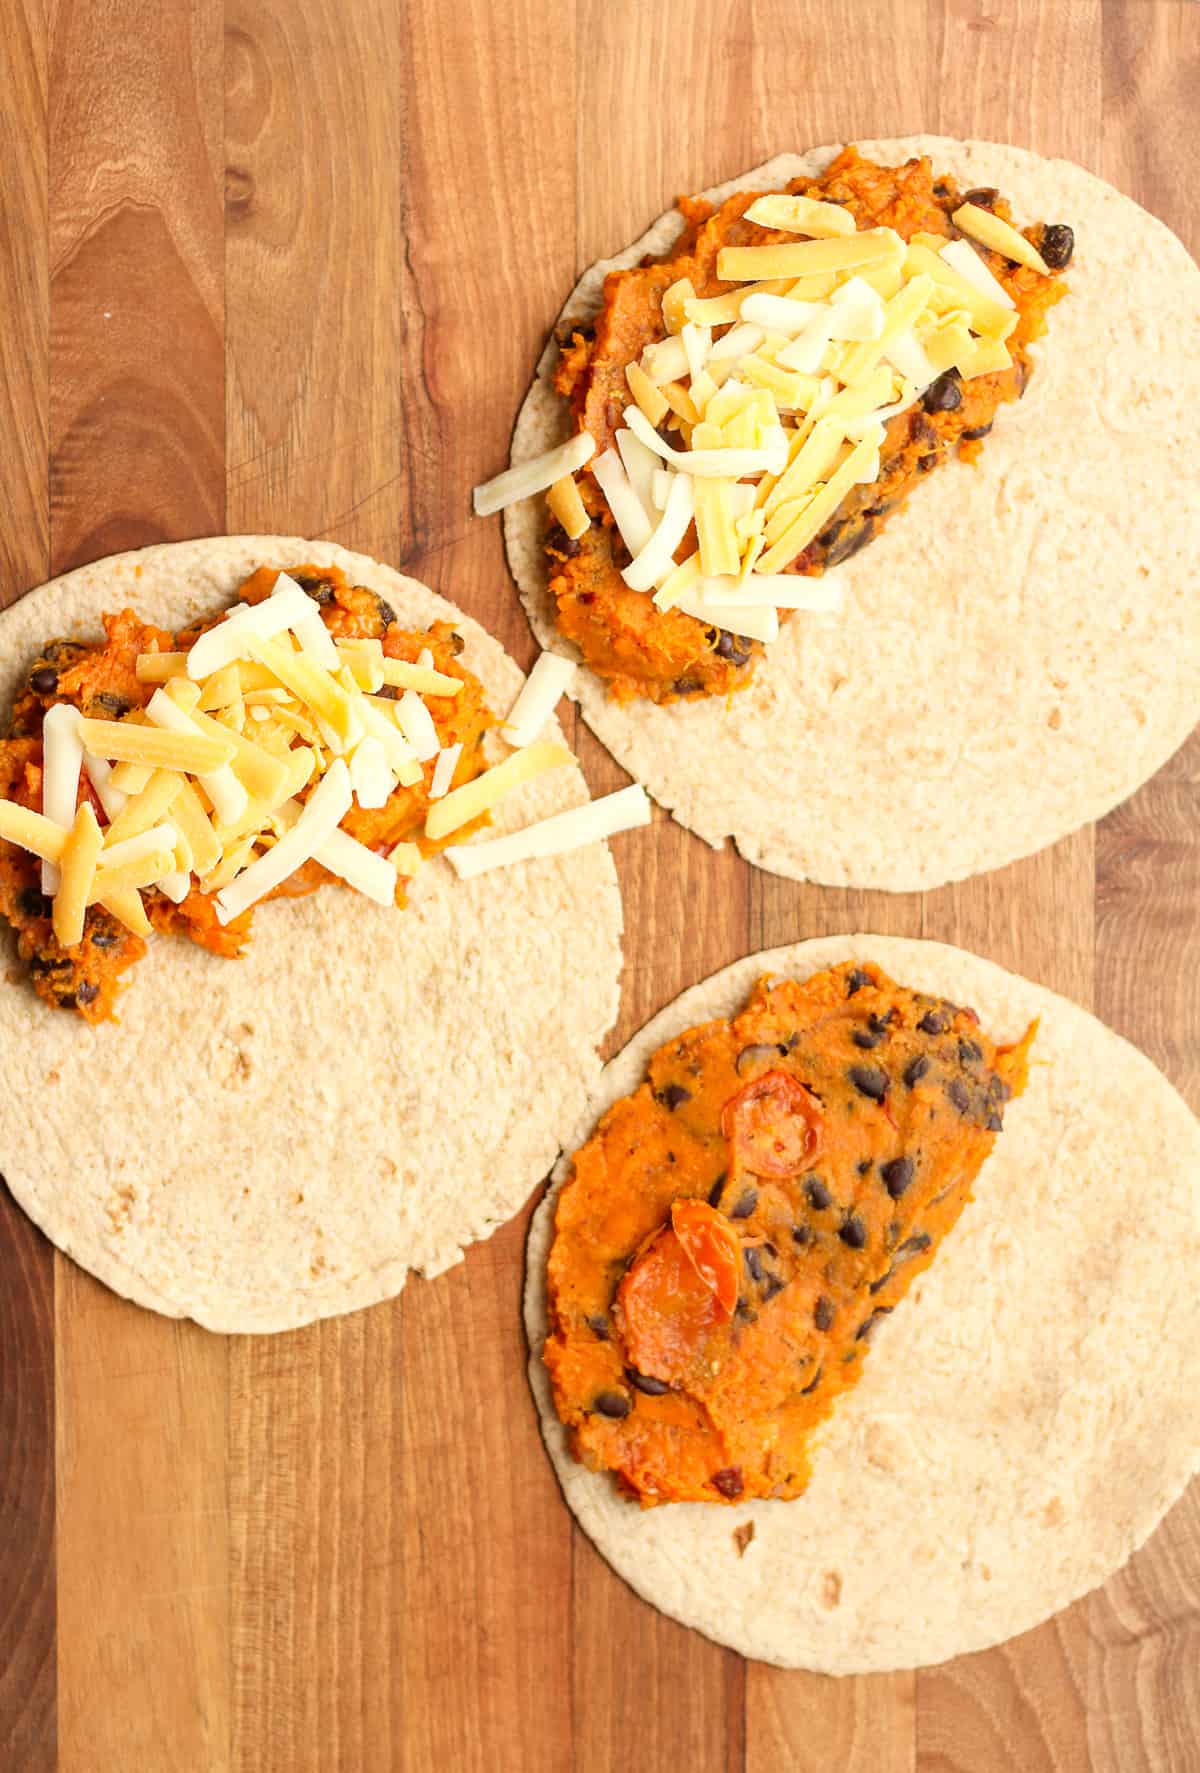 Three tortillas with the sweet potato mixture and cheese.